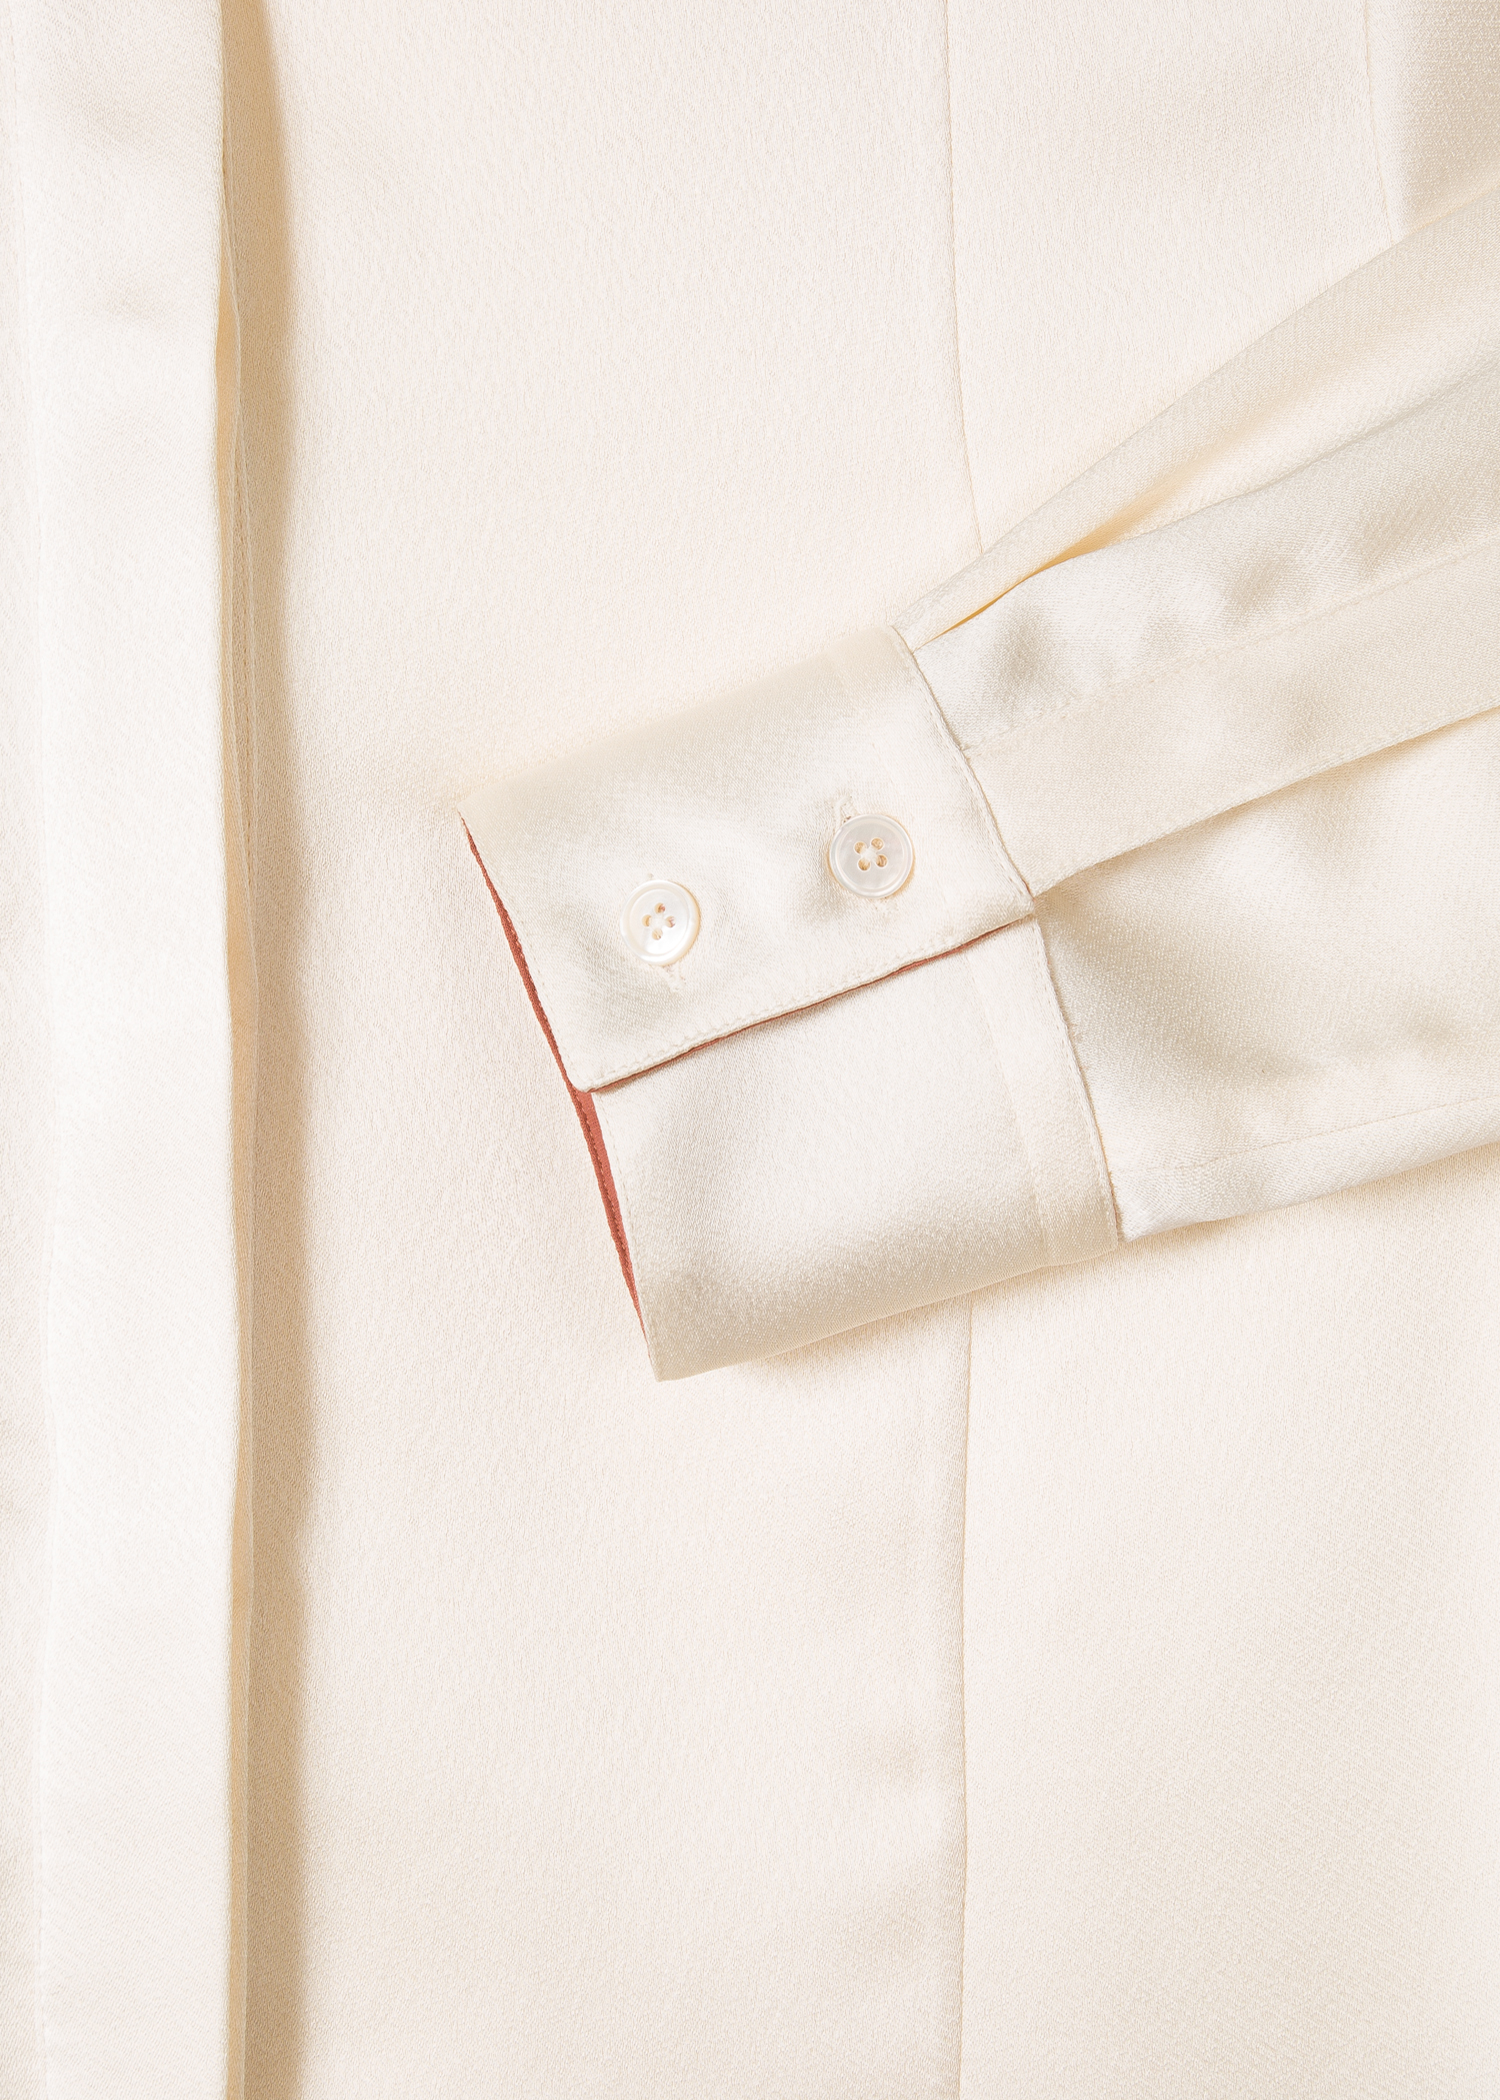 Cuff detail - Women's Cream Satin Shirt With Contrast Details Paul Smith